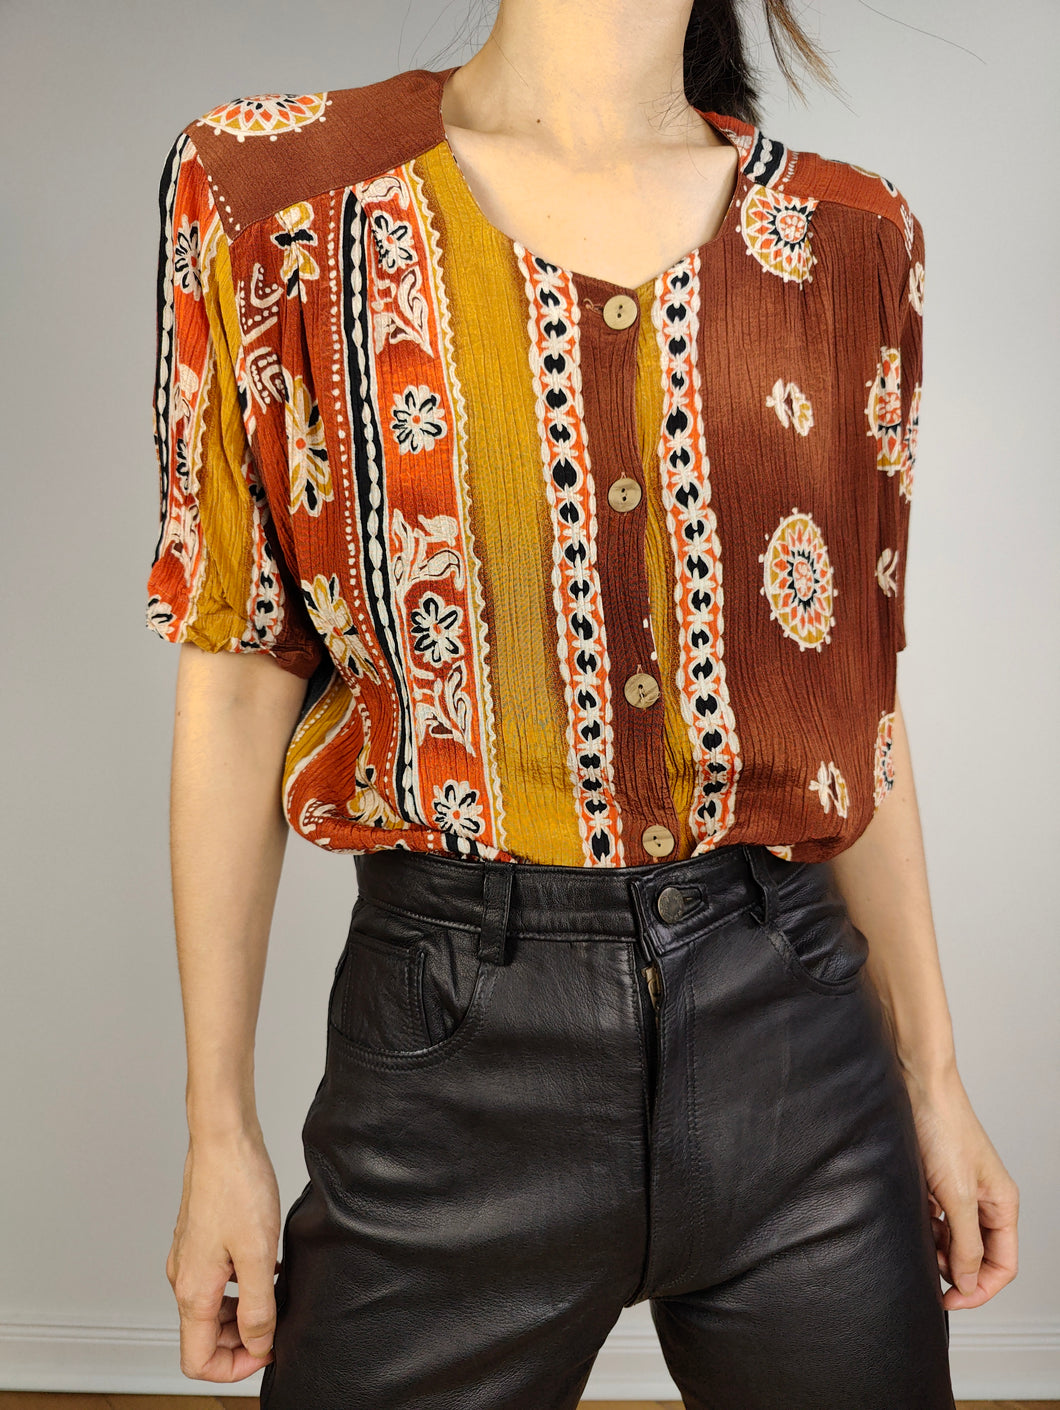 The Brown Boho Print Wrinkle Blouse | Vintage Maglificio yellow orange short sleeve pattern made in Italy women shirt S